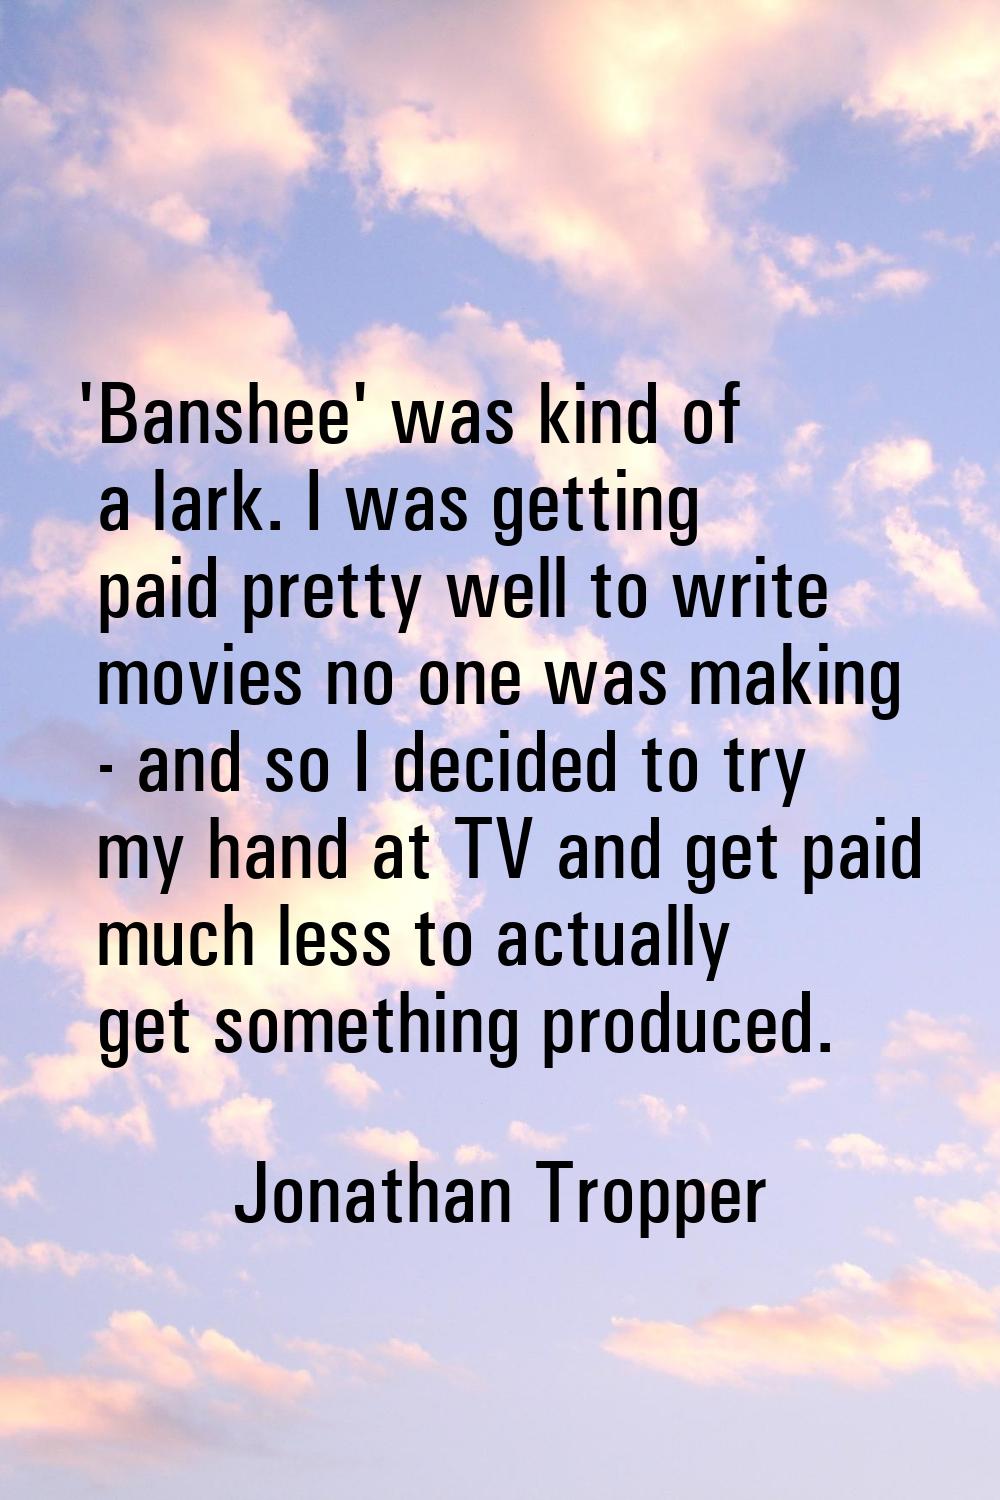 'Banshee' was kind of a lark. I was getting paid pretty well to write movies no one was making - an